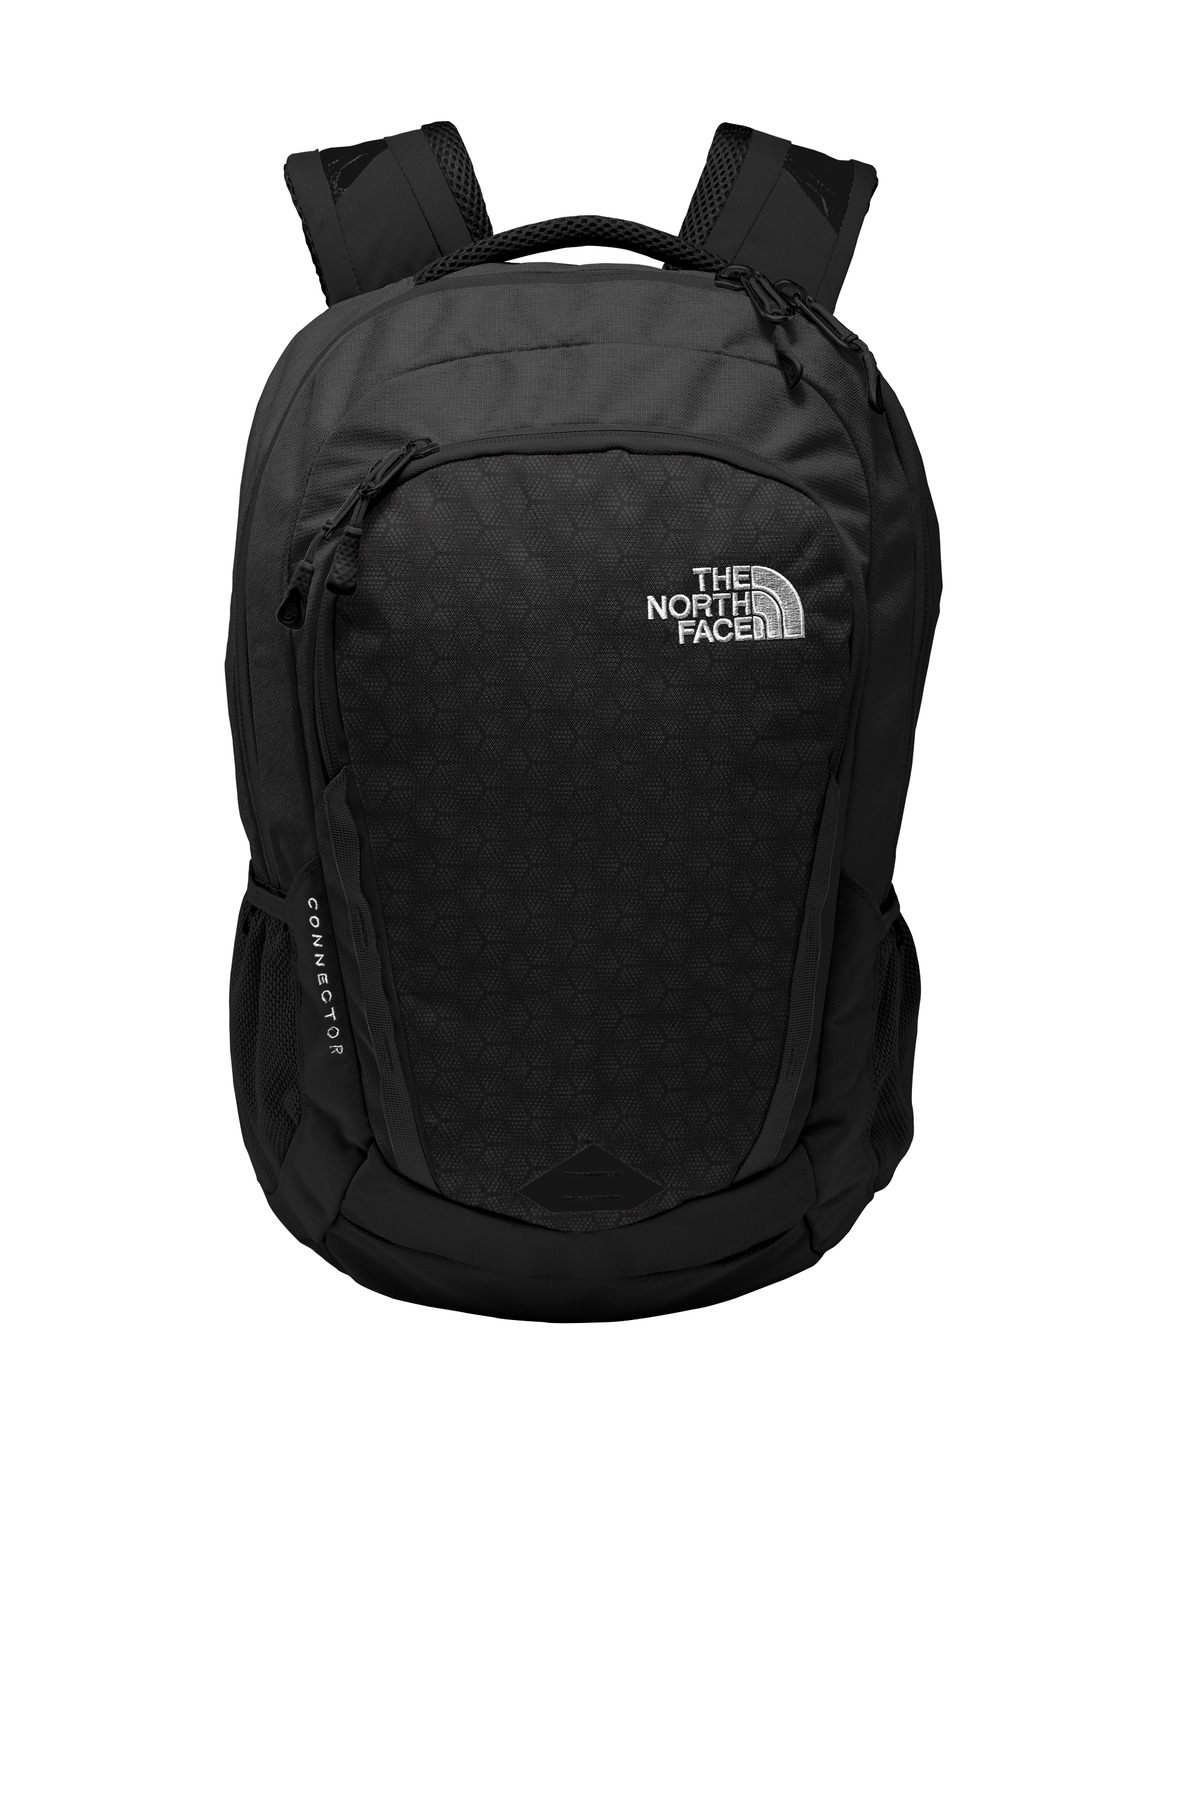 The North Face Hospitality Bags ® Connector Backpack.-The North Face